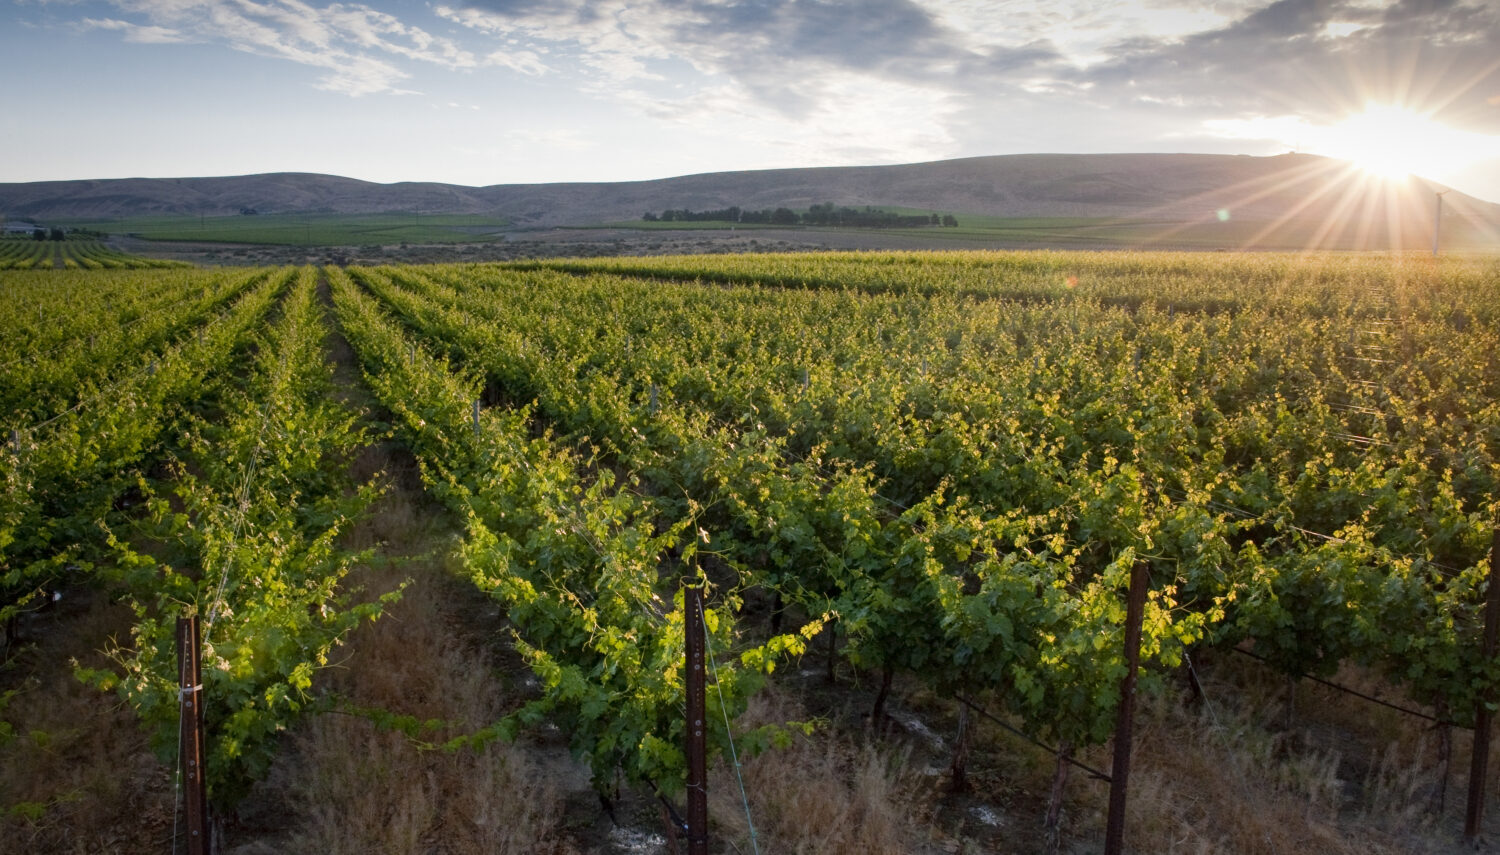 Rows of green grape vines in evening light stretch toward blue rolling hills in the distance. The sky above is blue with white and grey clouds.